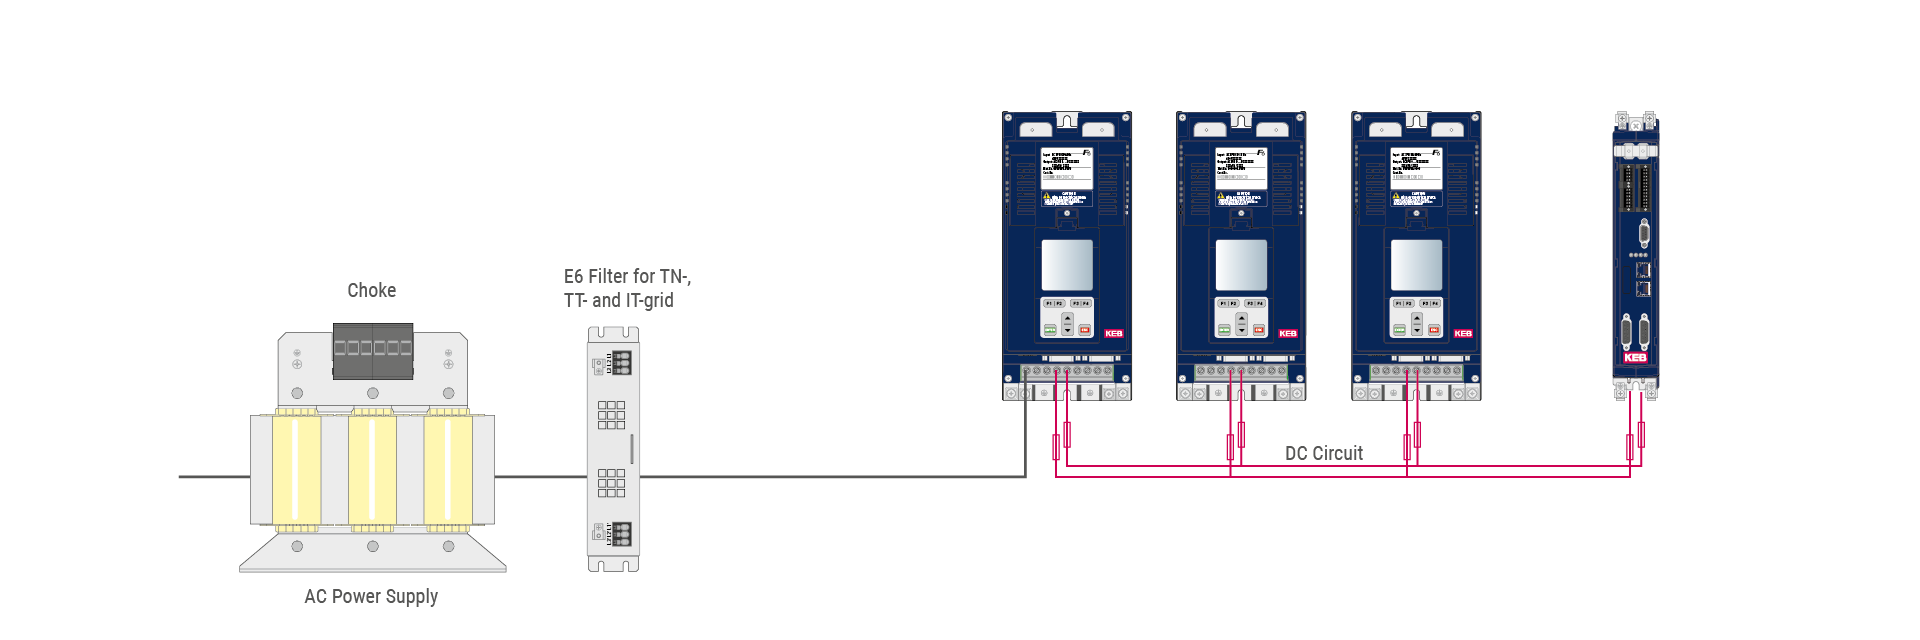 filters nad chokes for mains-side connection